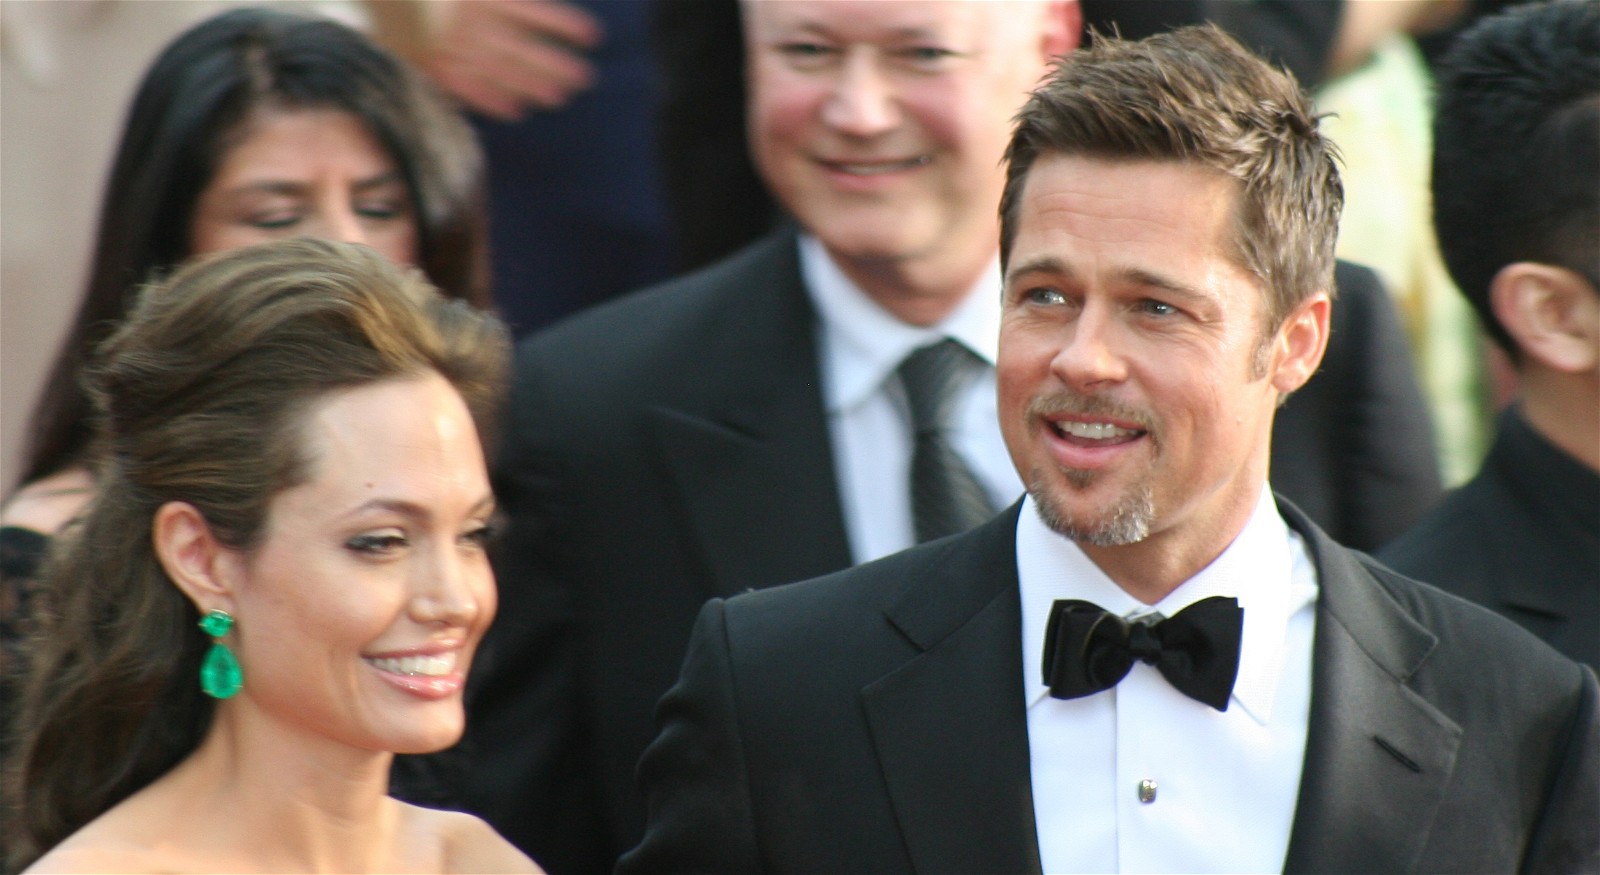 Angelina Jolie and Brad Pitt smiling at the 81st Academy Awards